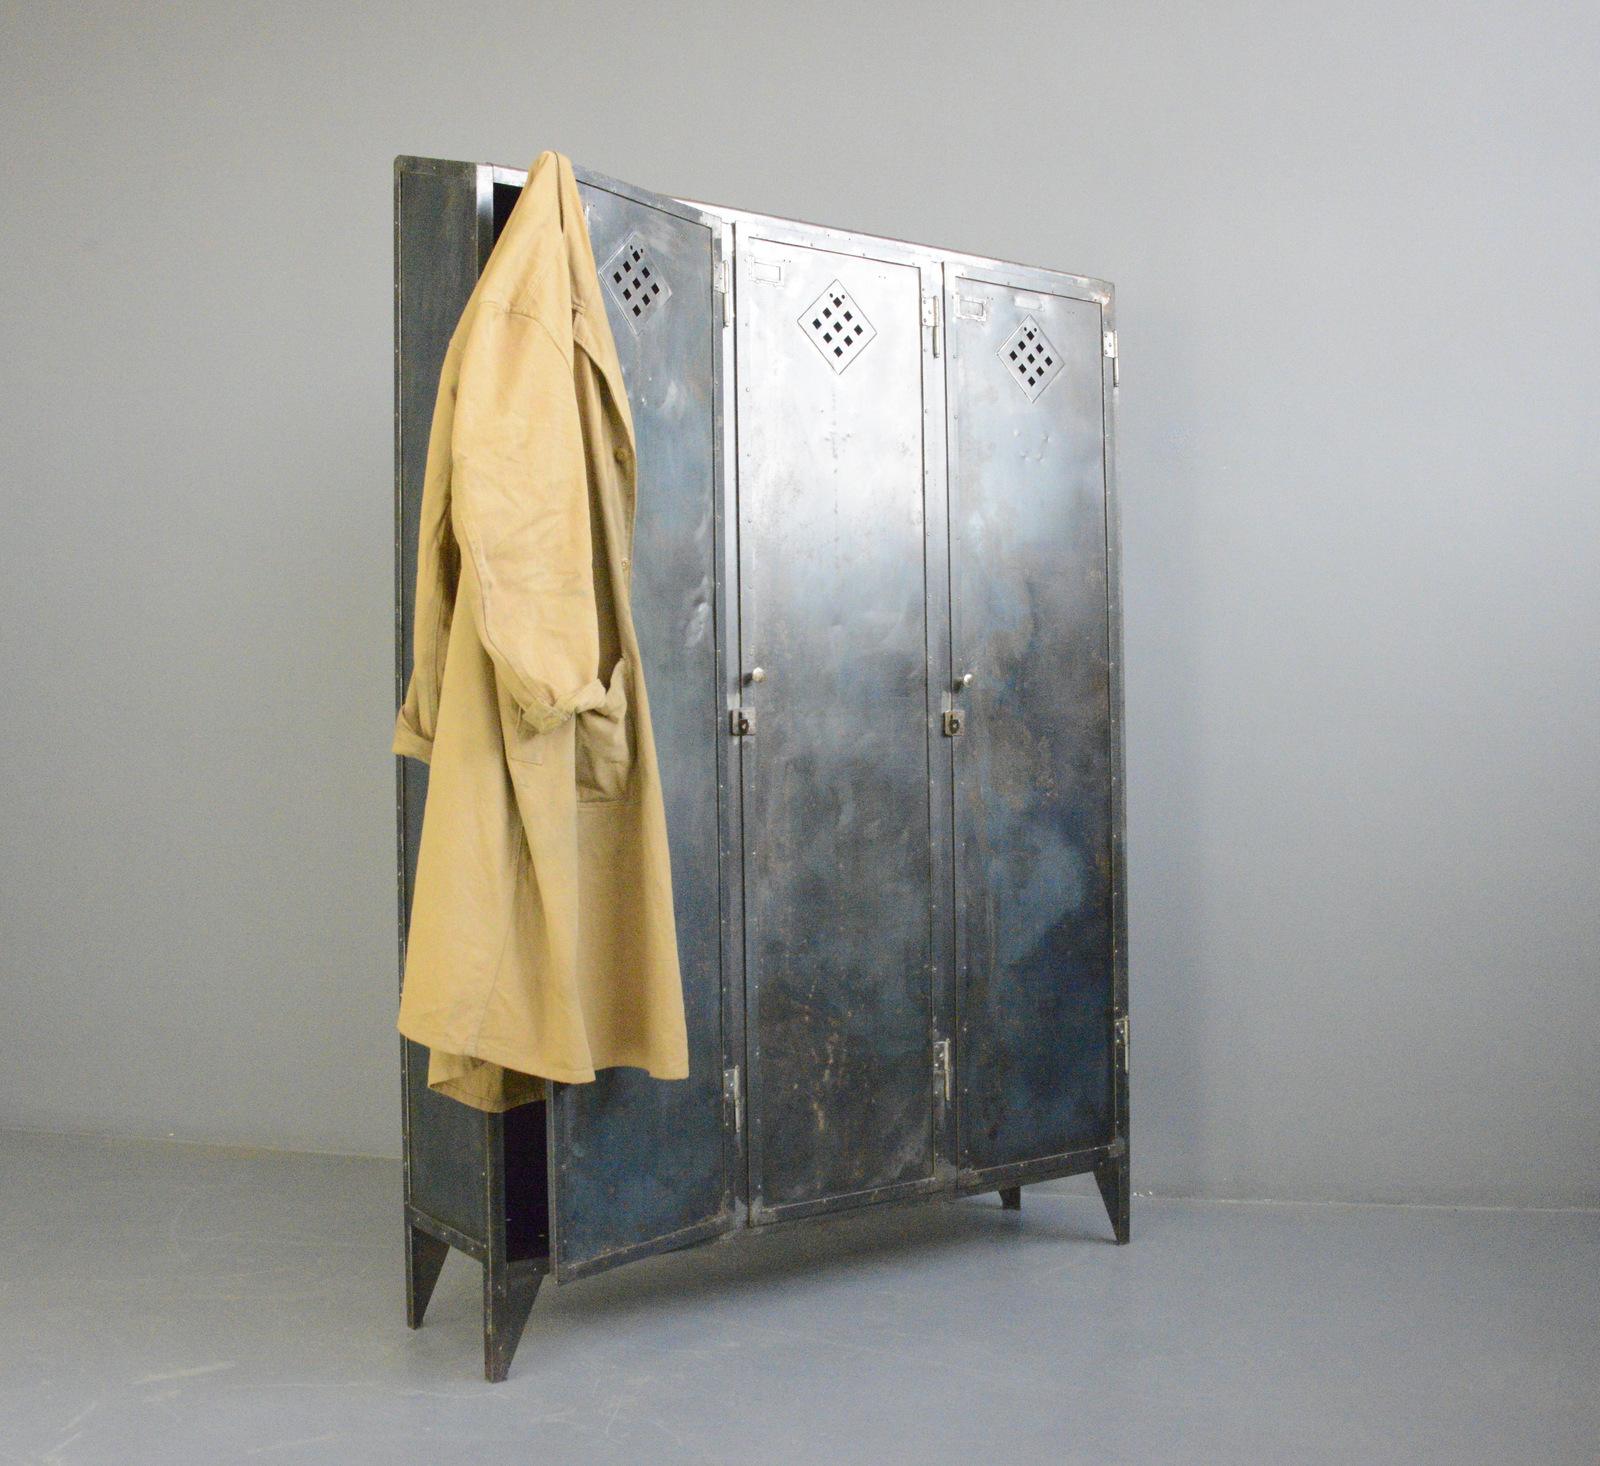 Industrial Lockers By Hulftegger & Co Zurich Circa 1920s

- Riveted sheet steel
- Diamond vents
- Hanging space and a shelf in each compartment
- Made by Hulftegger & Co Zurich
- Swiss ~ 1920s
- 122cm wide x 34cm deep x 180cm